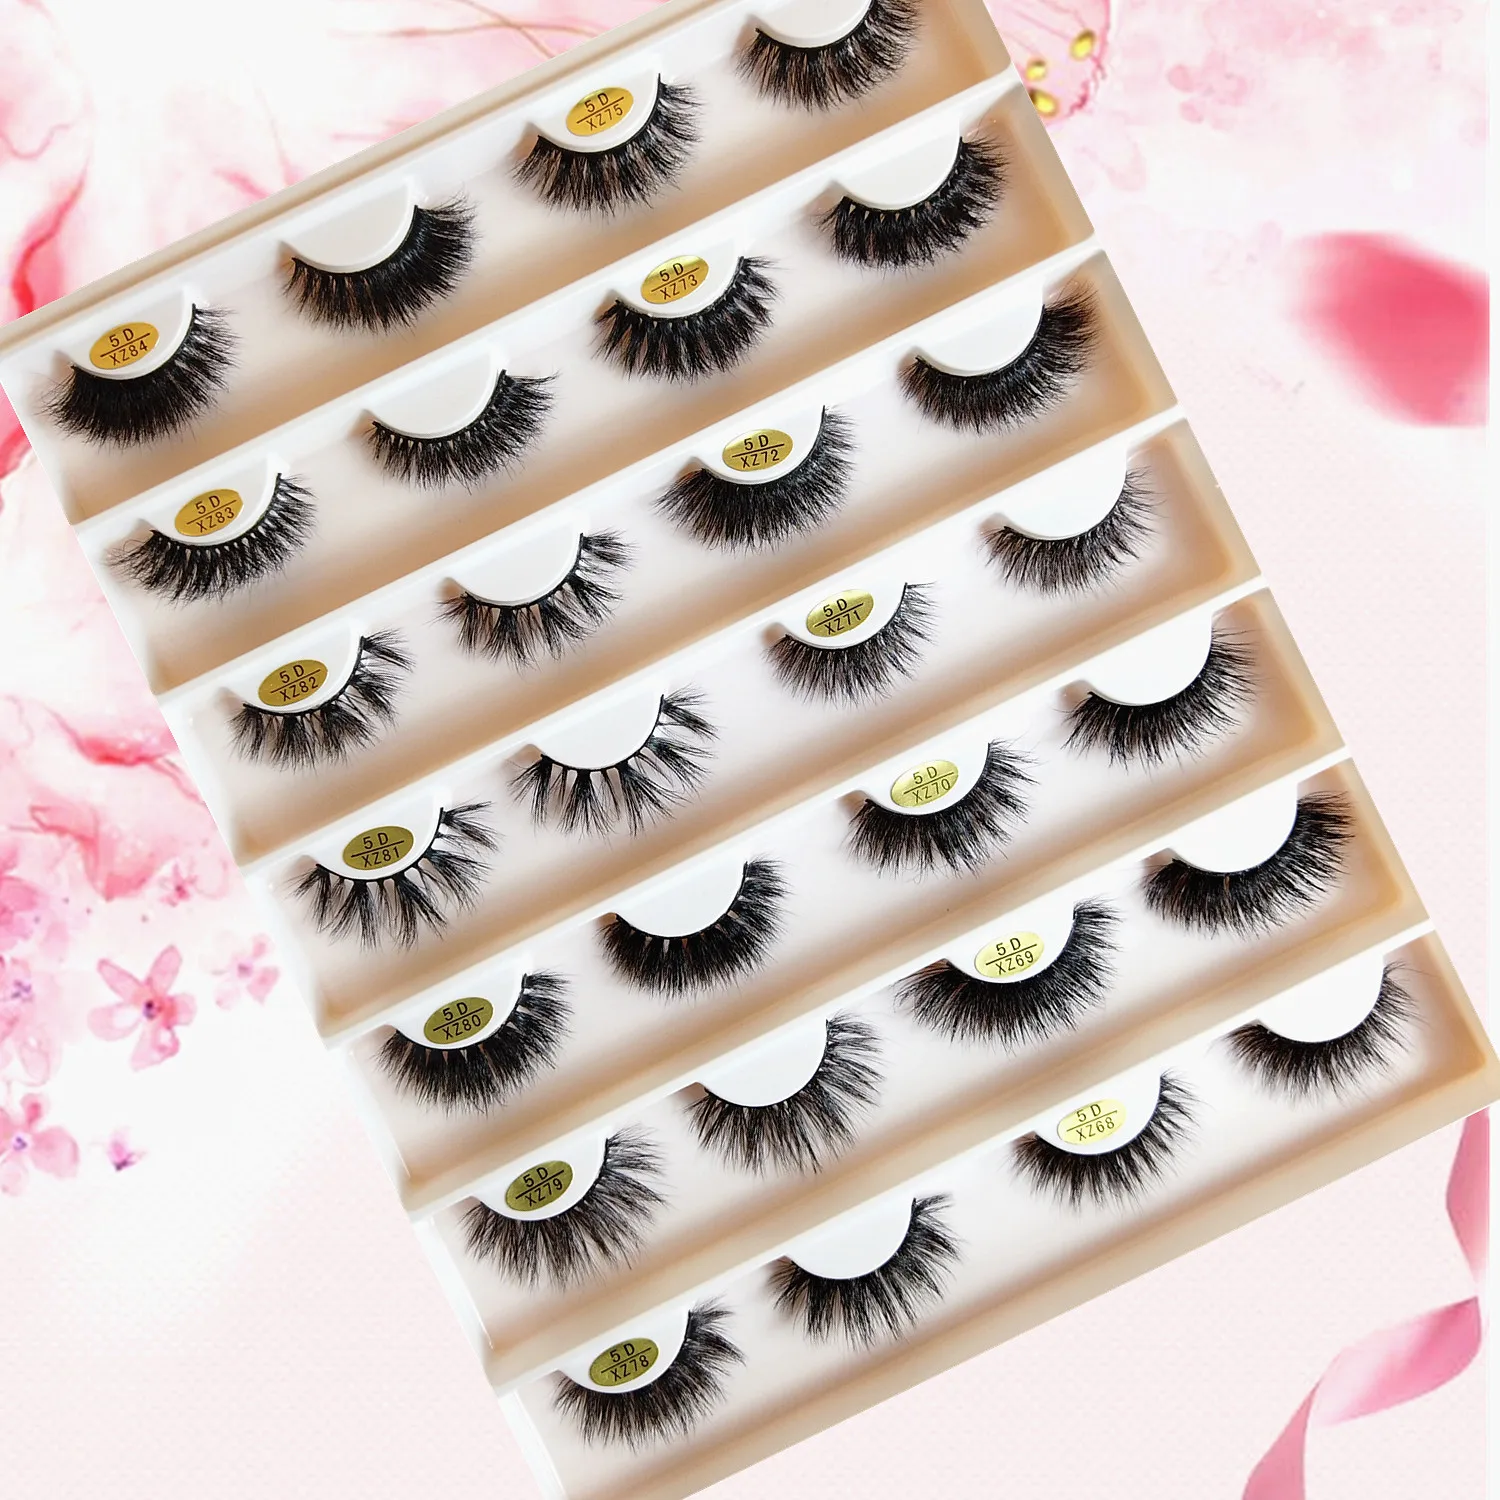 

New arrival false lashes 3d Fluffy Dramatic Mink Eyelash Vendor 5d 12mm 15mm 16mm 17mm 18mm Mink Eyelashes with custom Packaging, Black color